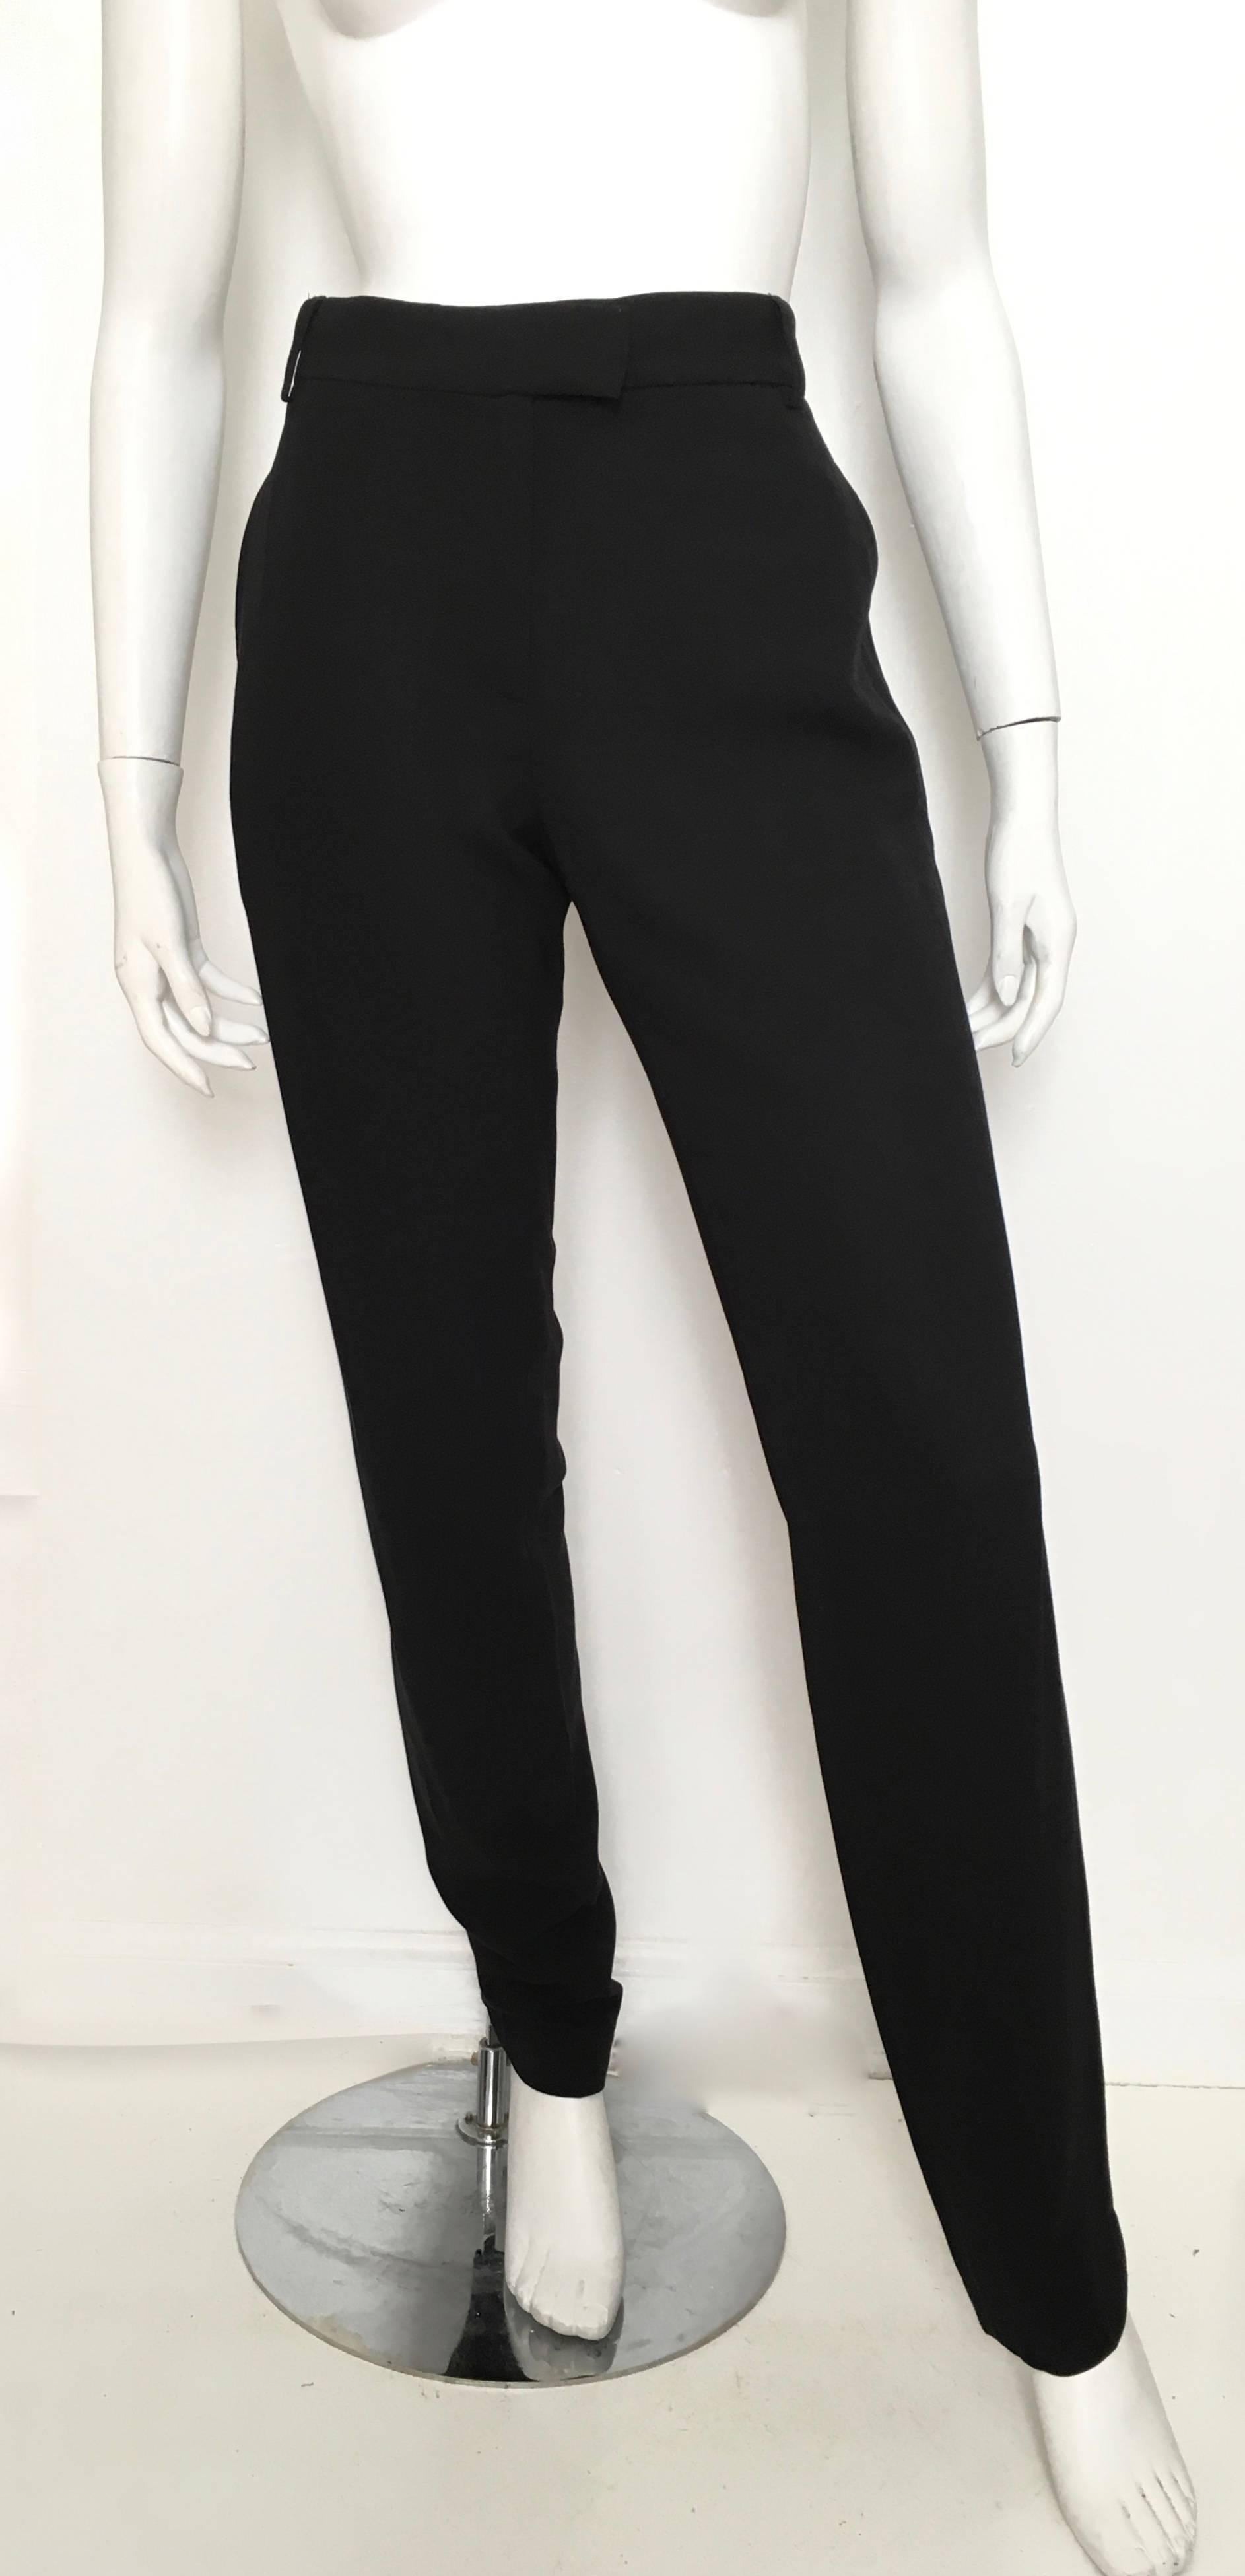 Ann Demeulemeester black wool tuxedo "Eyes Closed Tight" beaded on the trim as shown in photo is a size 40 and fits like an USA size 8.  Ladies please use your tape measure so you can measure your waist-line to make certain these gorgeous